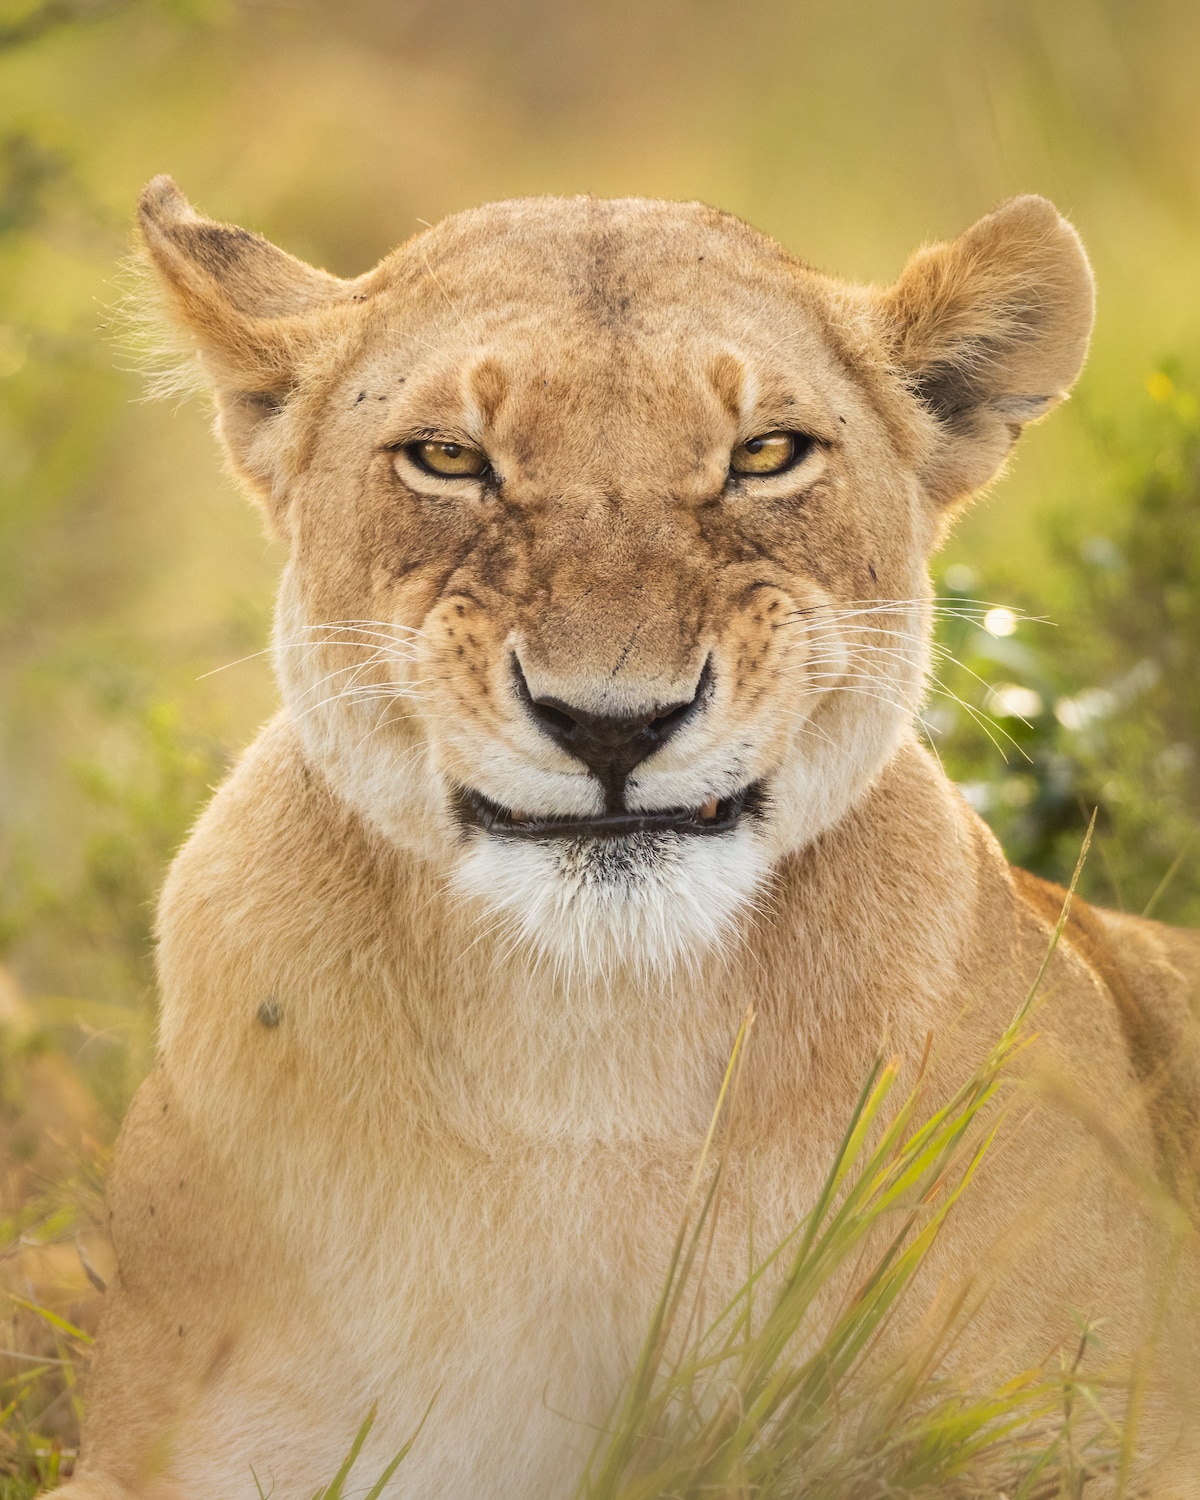 Lioness Making Funny Face Into the Camera